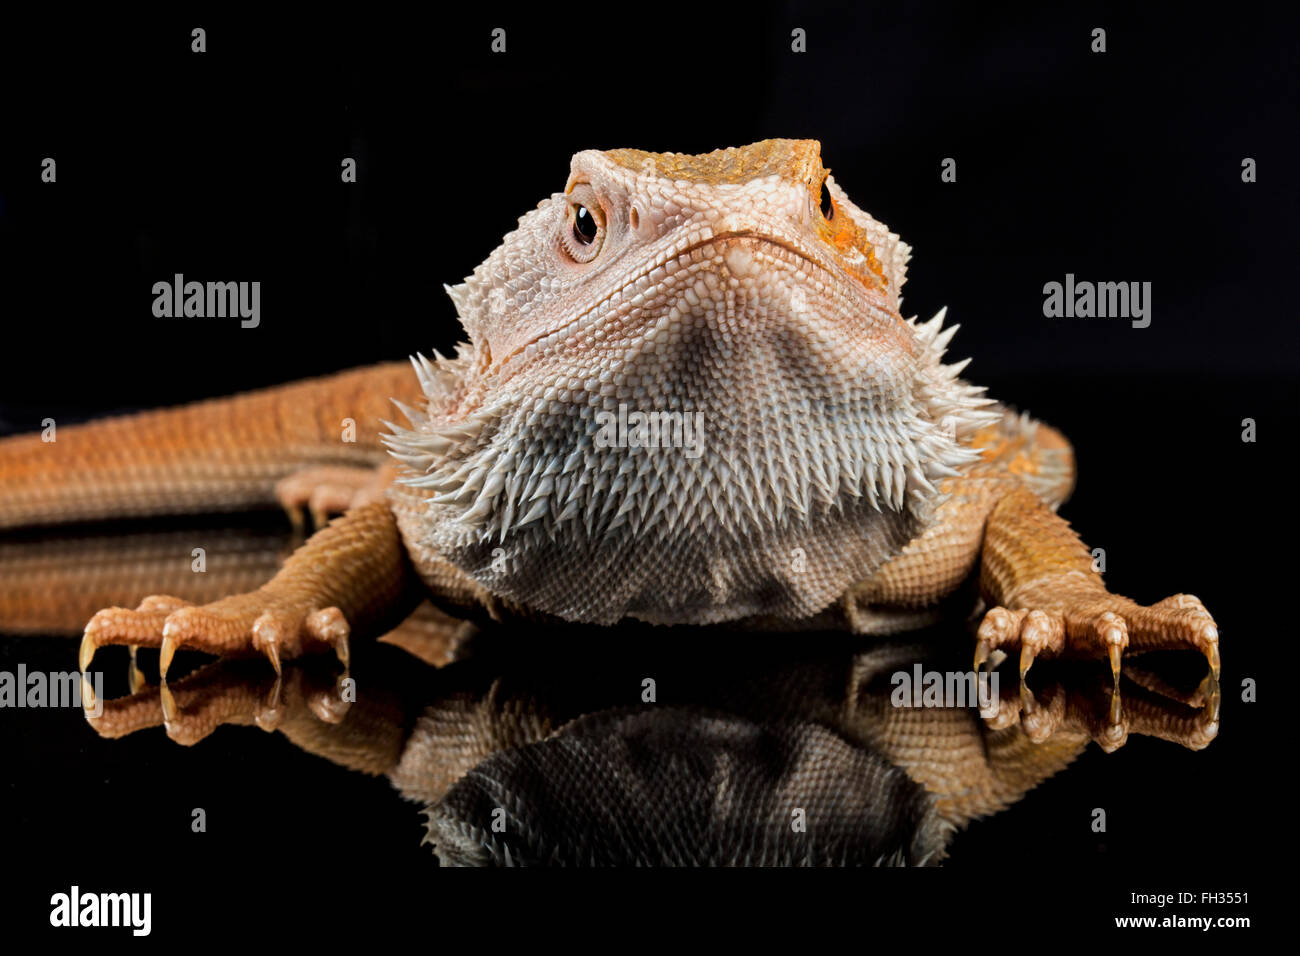 Bearded Dragon with dramatic reflection on black perspex, looking menacing with prominent display of sharp claws. With Property Release. Stock Photo